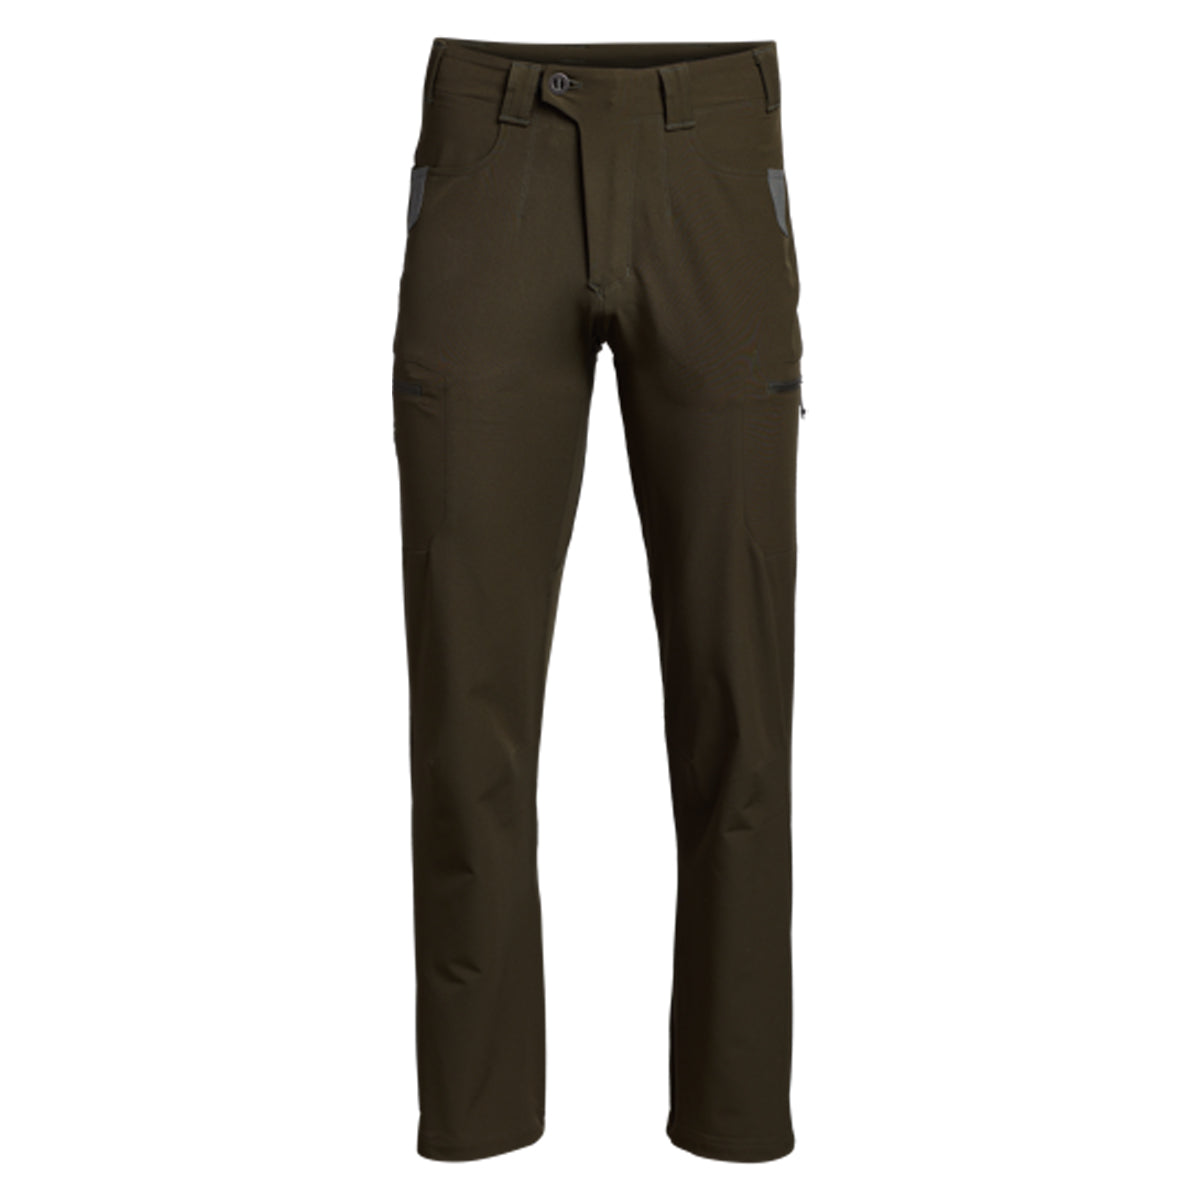 Sitka Traverse Pant in Deep Lichen by GOHUNT | Sitka - GOHUNT Shop